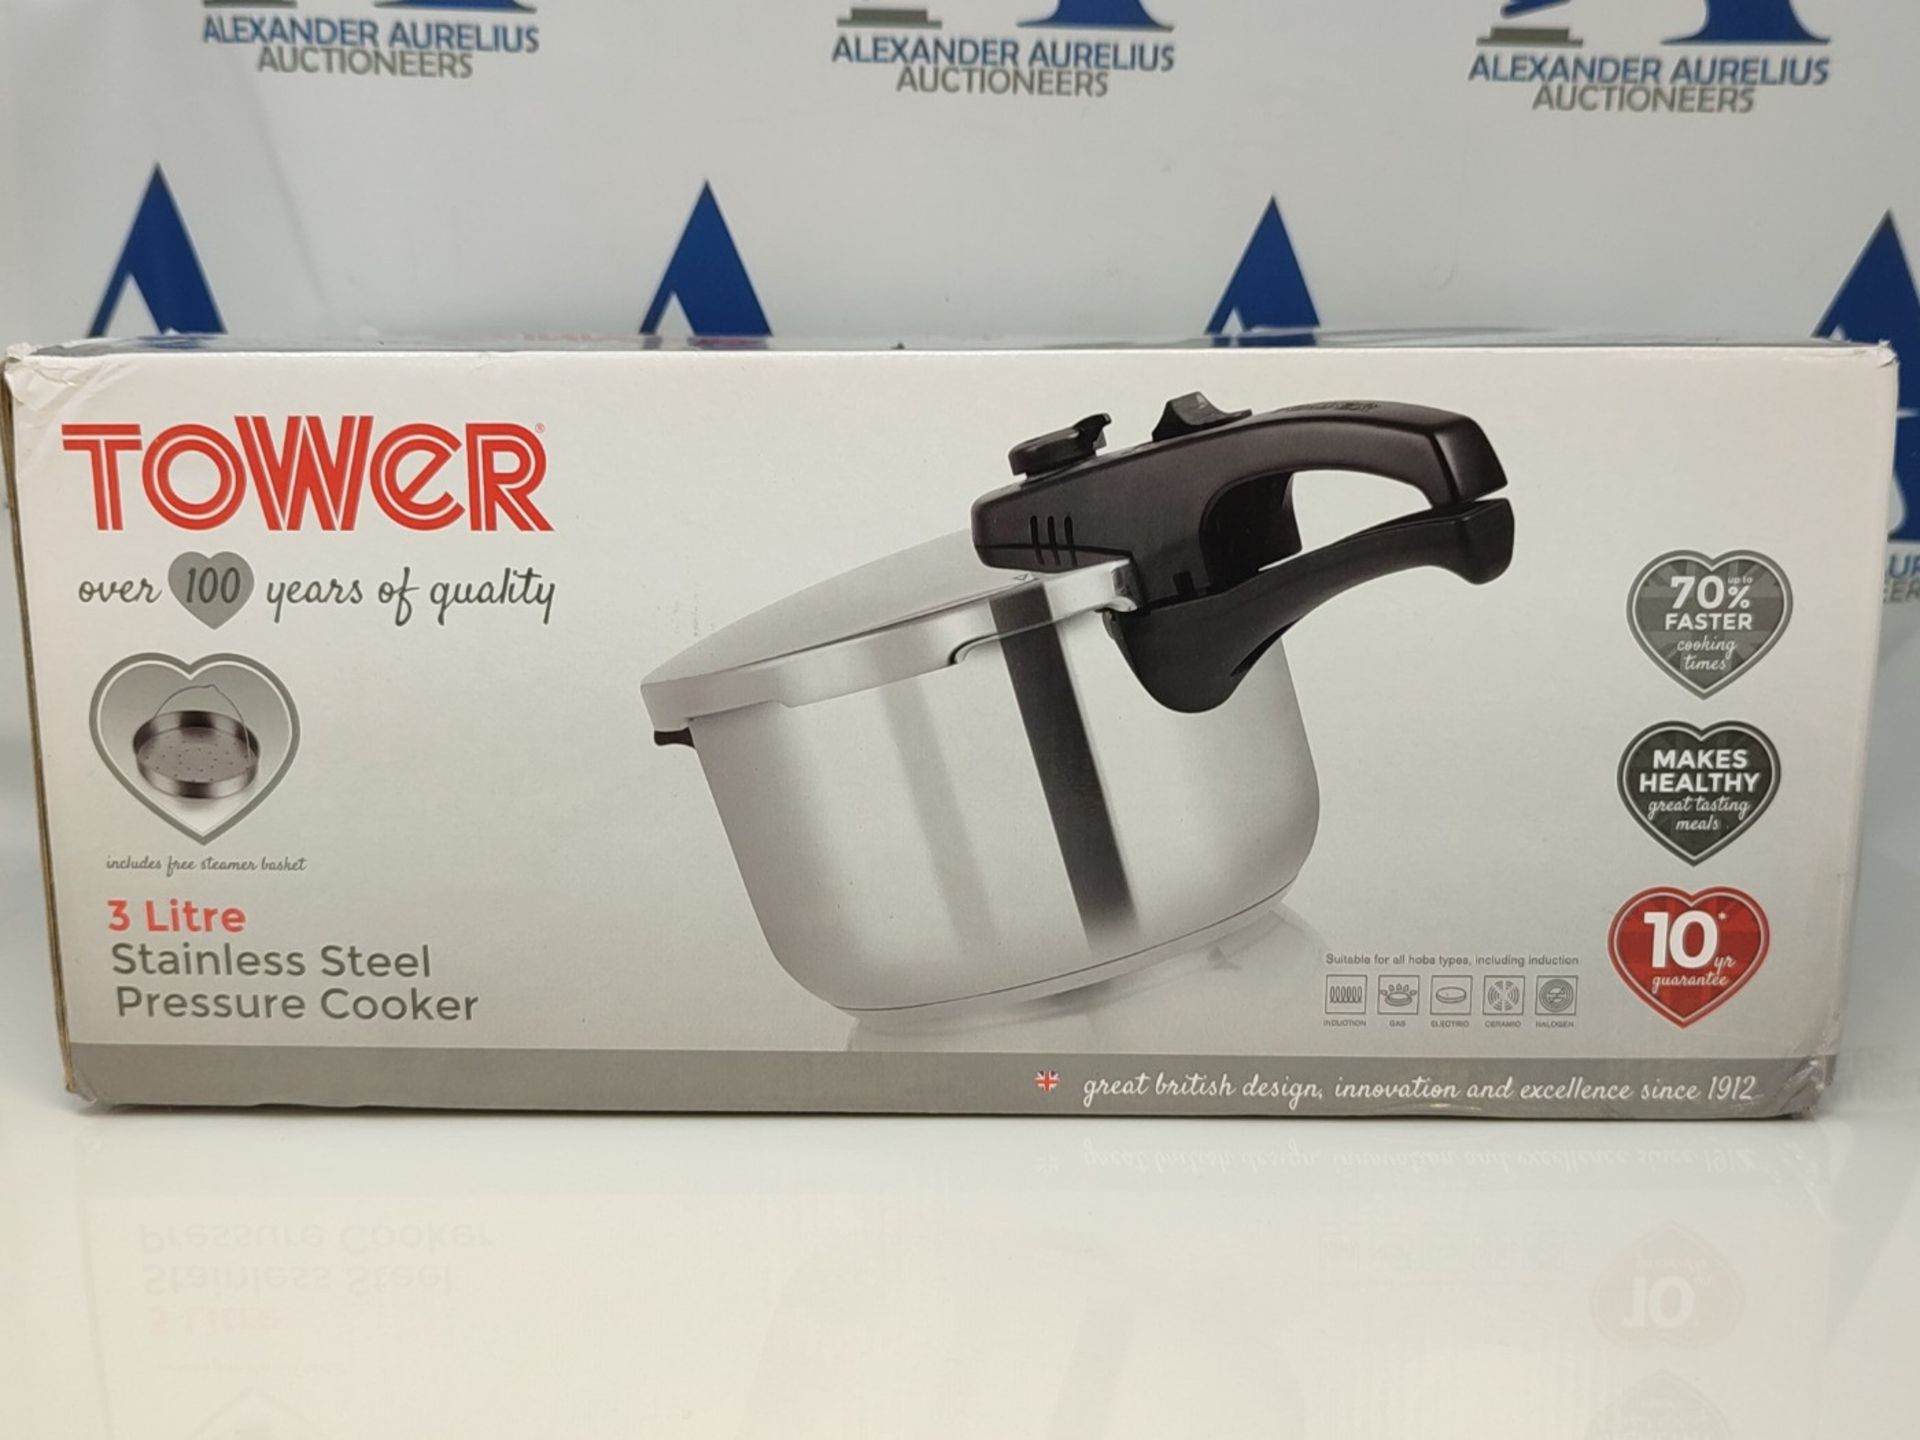 Tower T80245 Stainless Steel Pressure Cooker with Steamer Basket, 3 Litre, Stainless S - Image 2 of 3